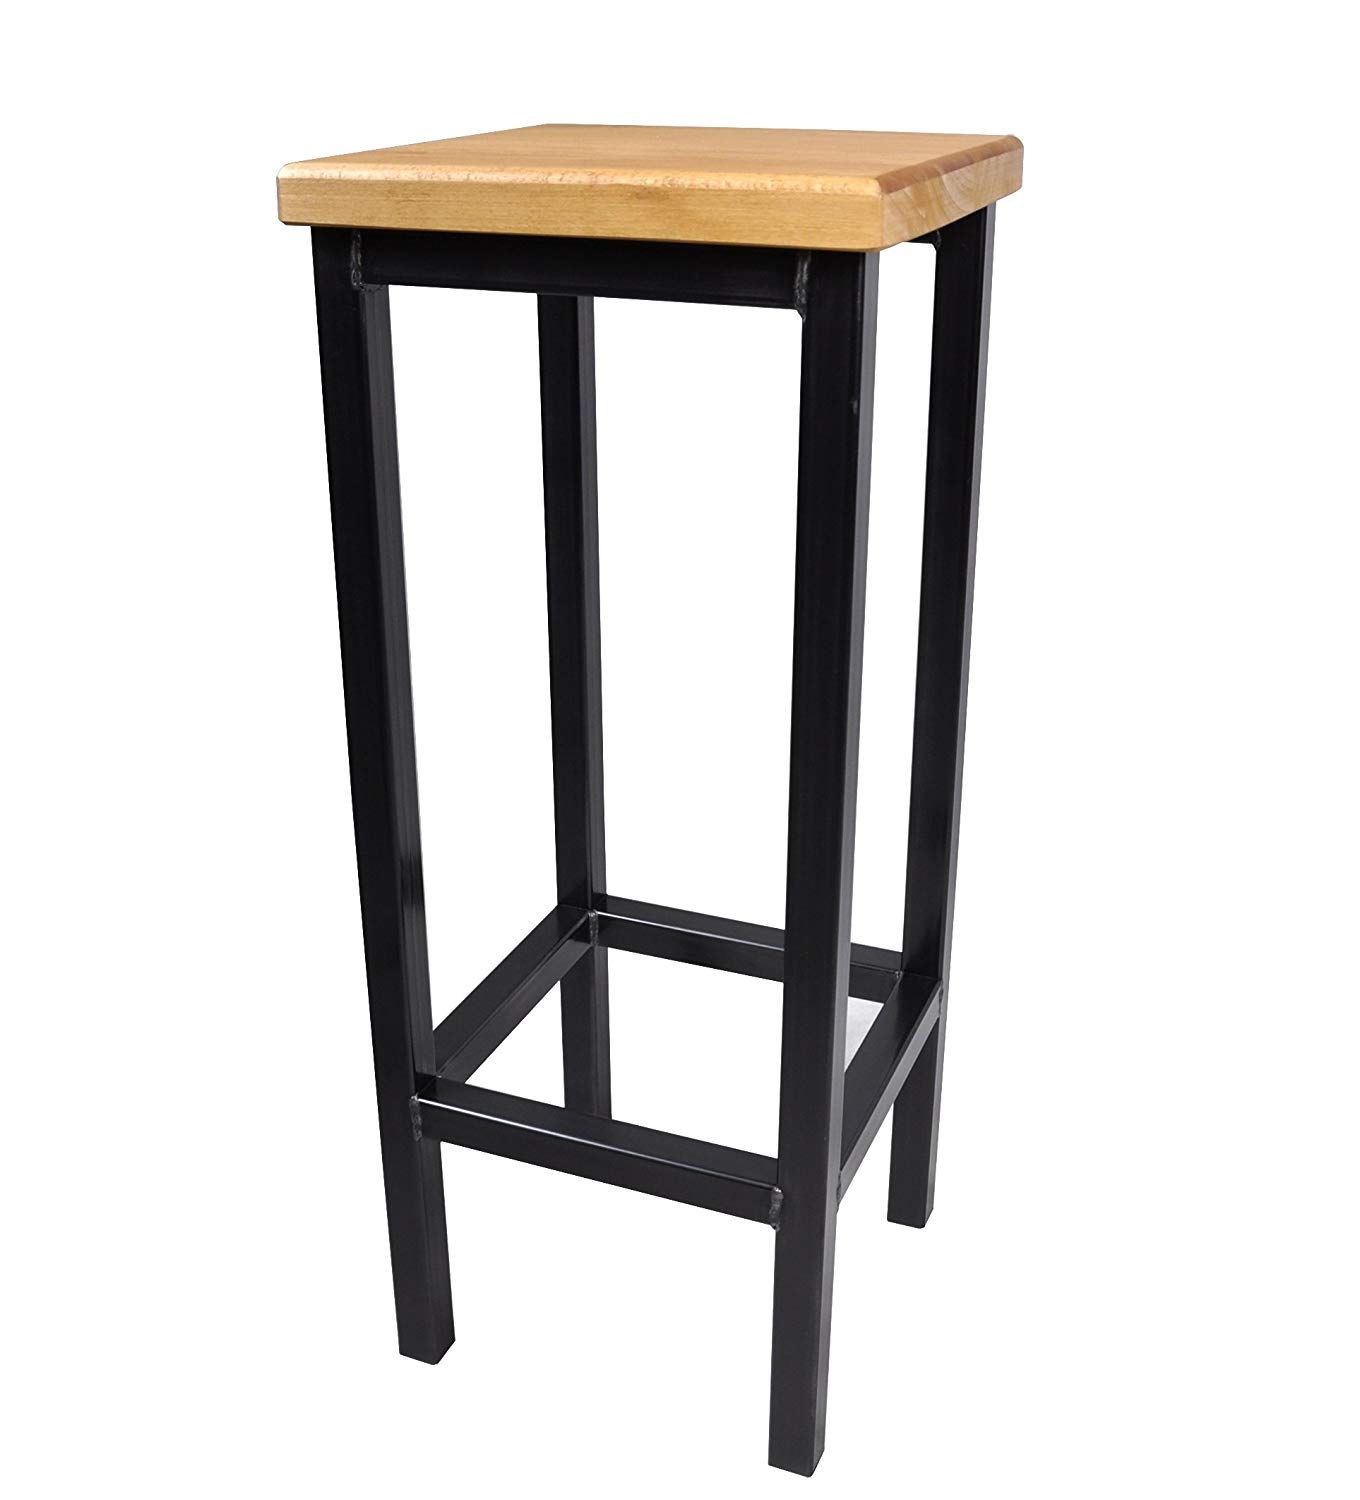 Preferred Magnetic Mobel Wooden Stool Bar Pub Industrial Design Urban With Alder Pub Tables (View 9 of 25)